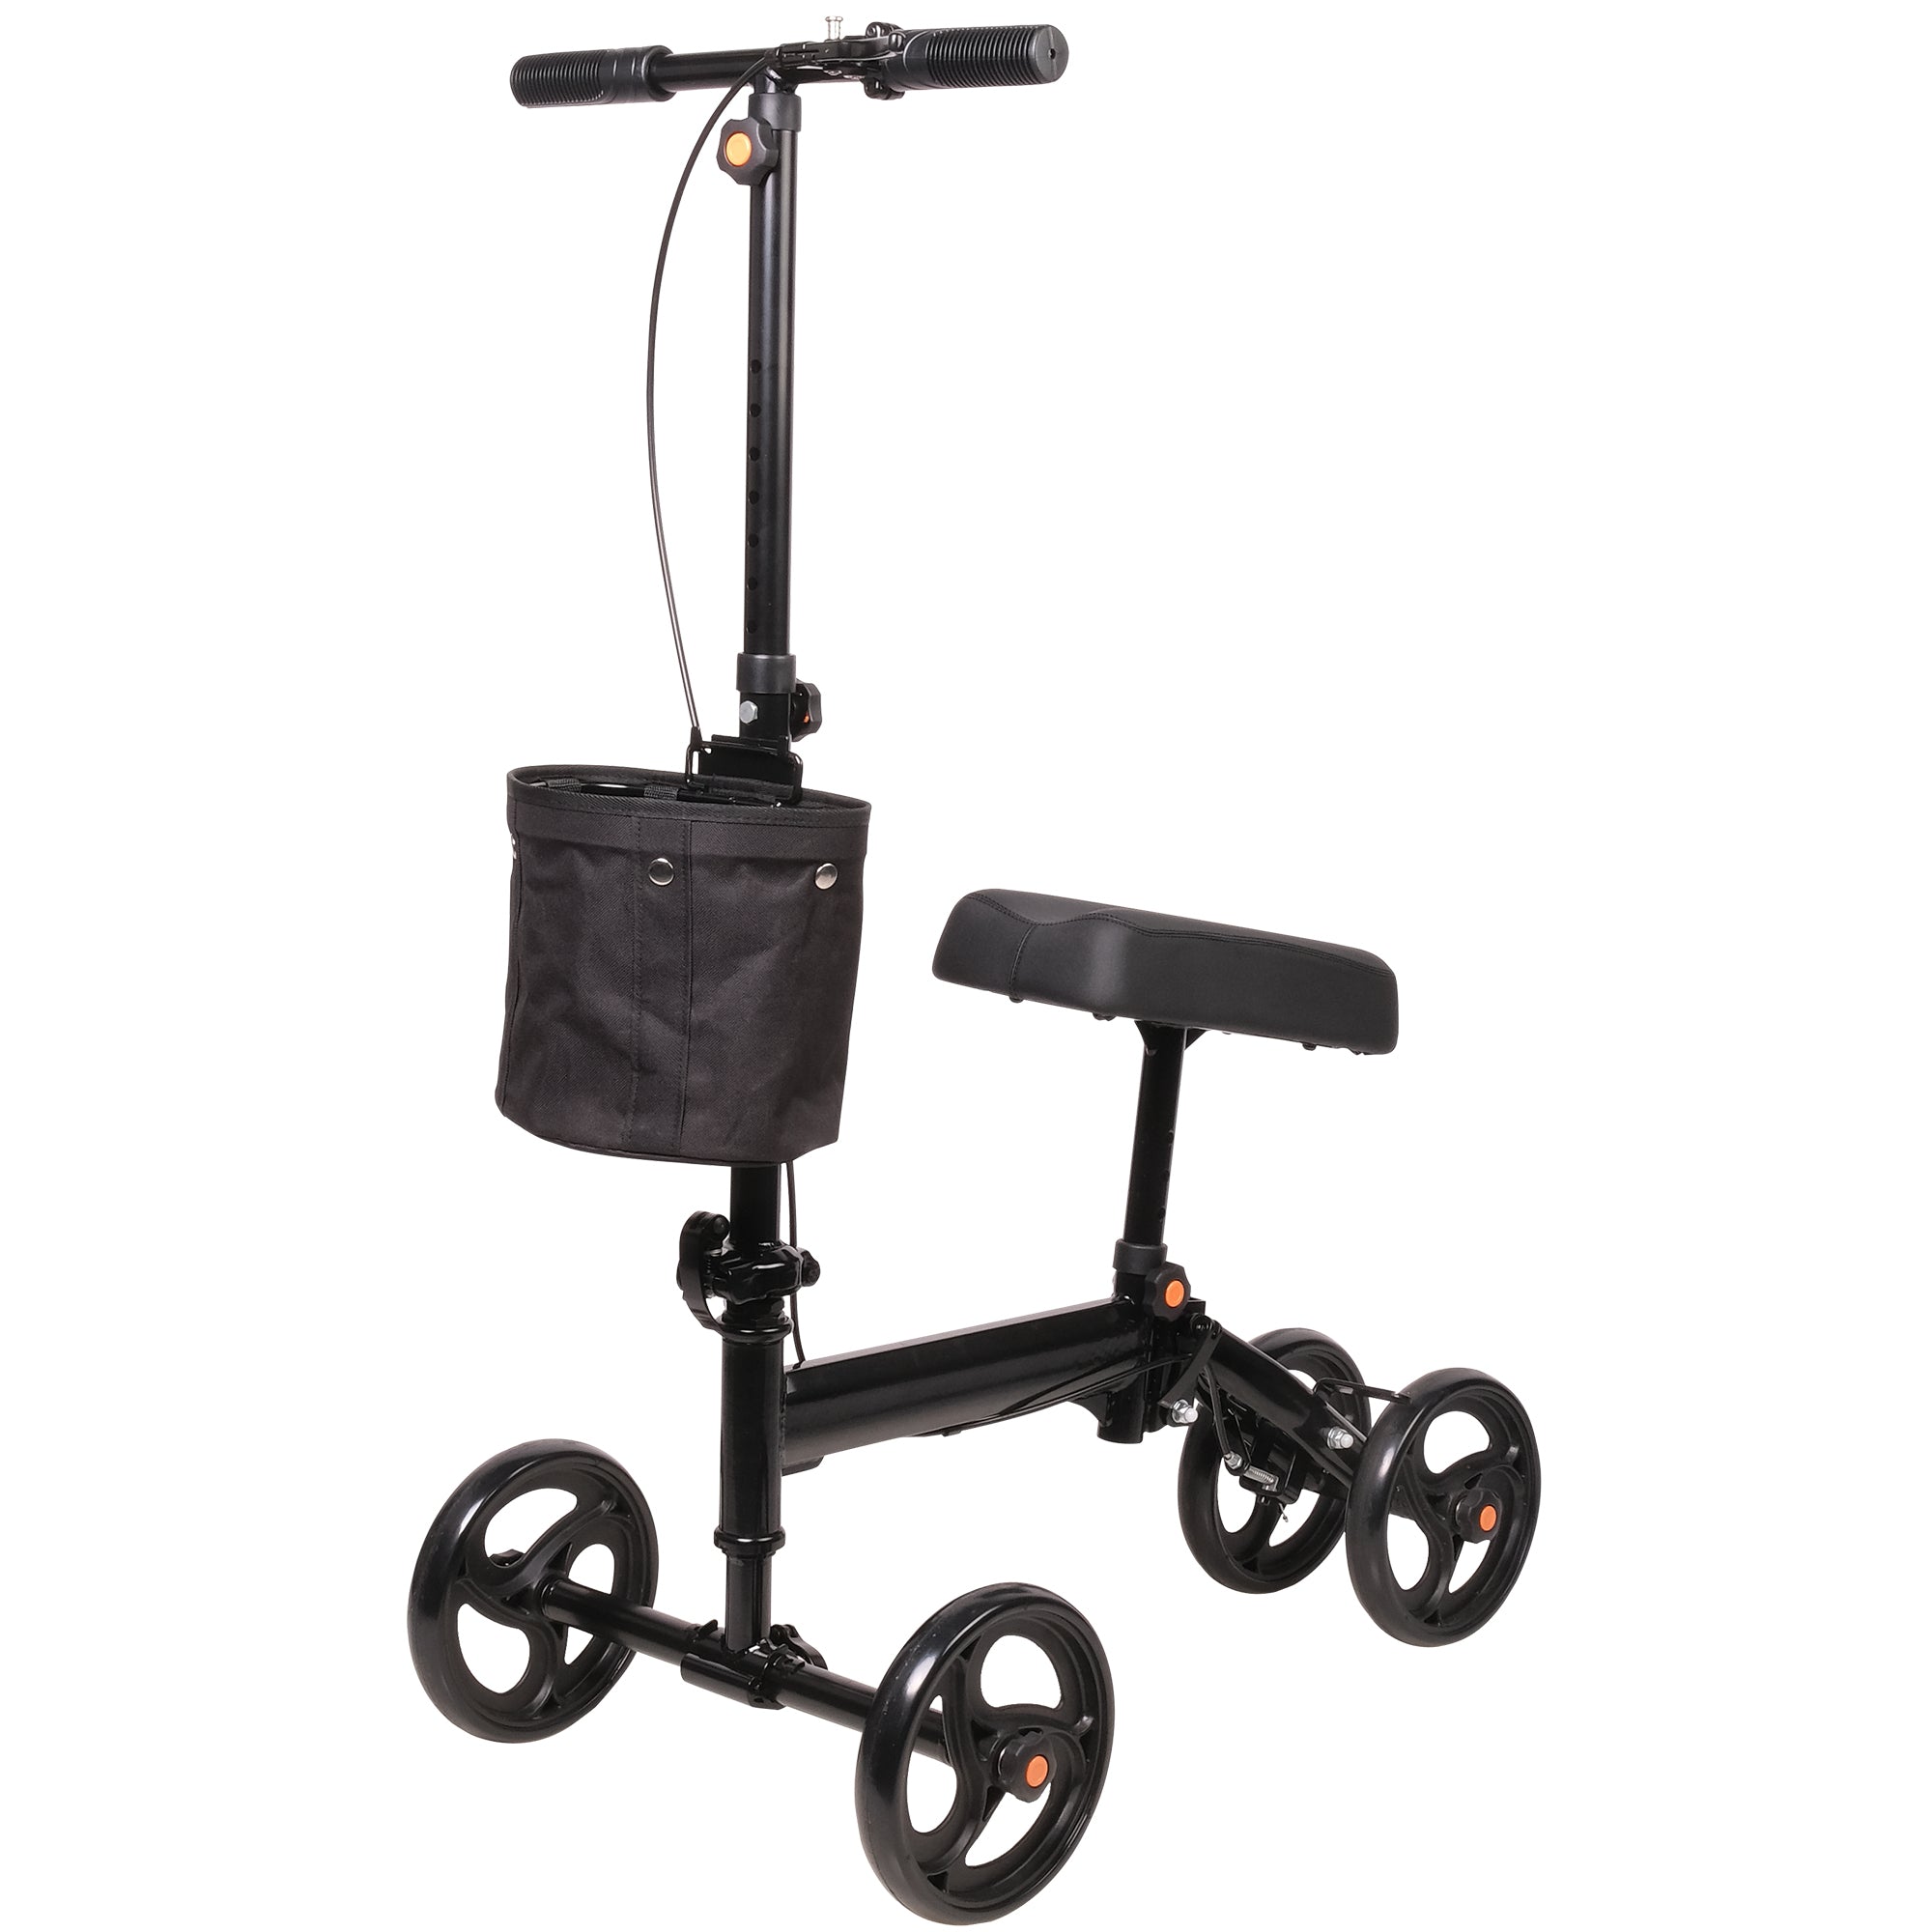 Luckyermore Foldable Knee Walker Adjustable Steerable Knee Scooter Suitable with Foot/Ankle Injuries, Black